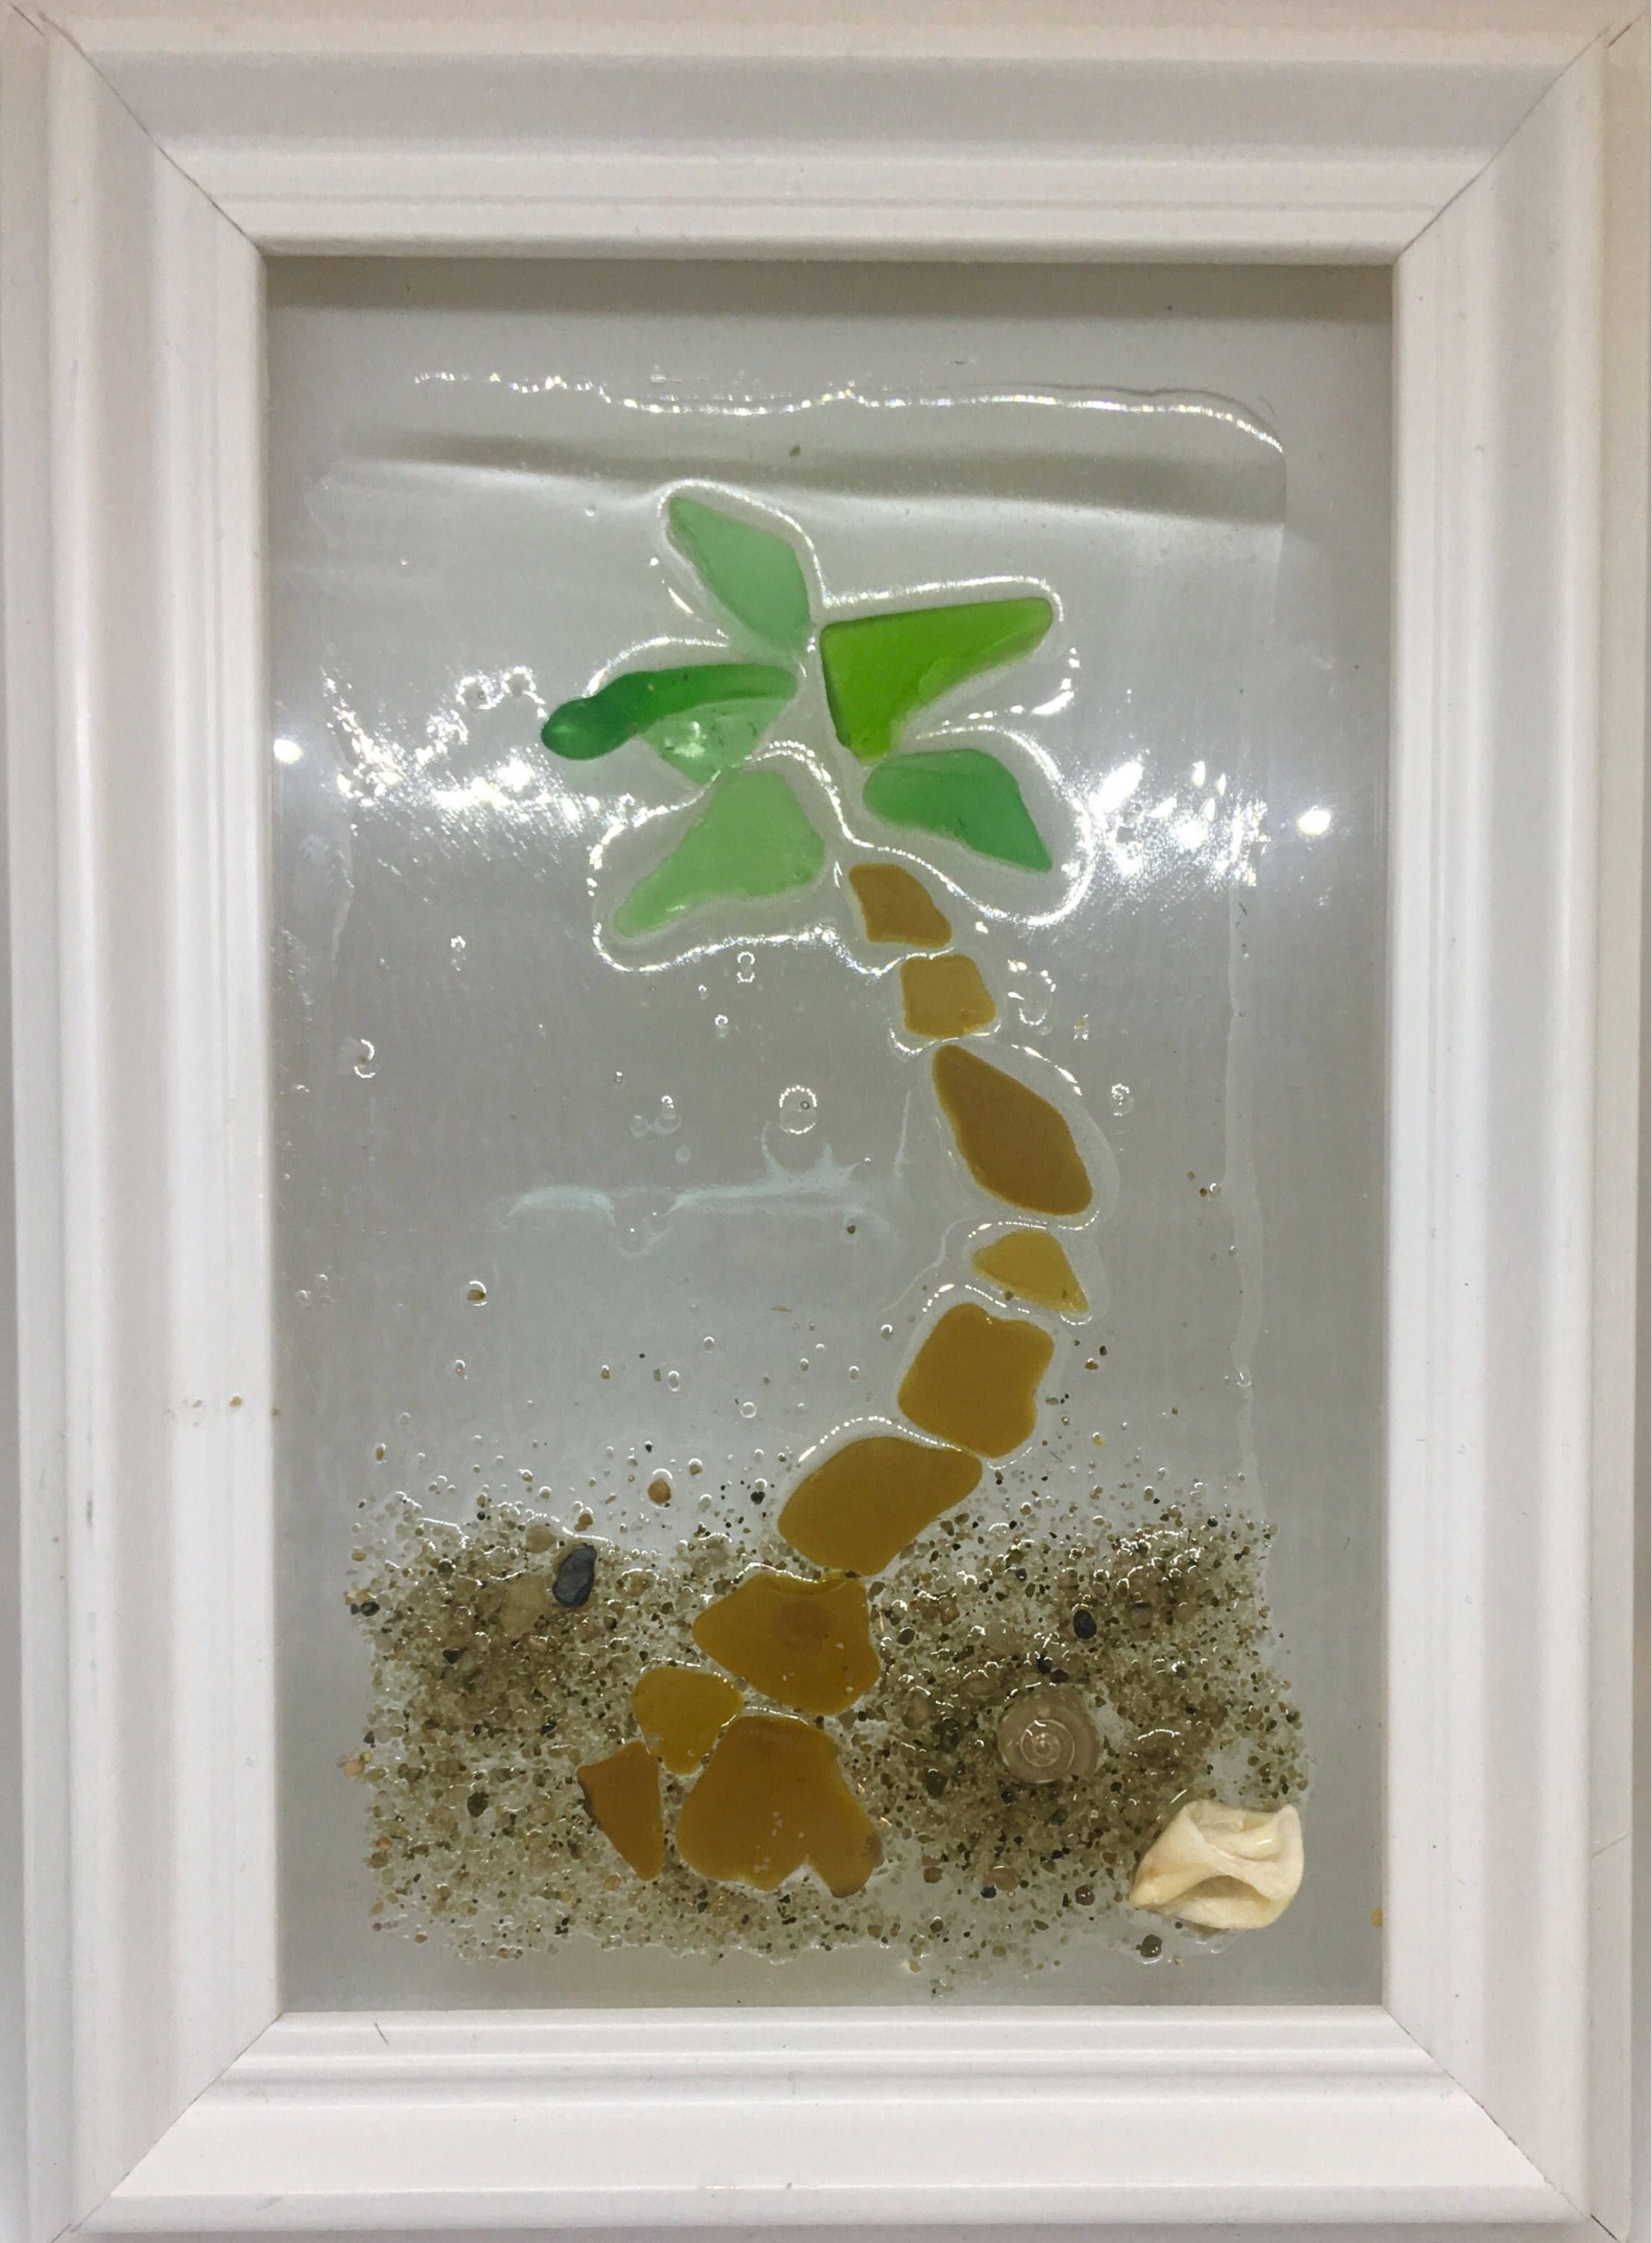 Sea Glass Wall Art: Palm Tree Design Made From Genuine Sea Glass 4x6 Intended For Most Recent Palm Tree Wall Art (View 20 of 20)